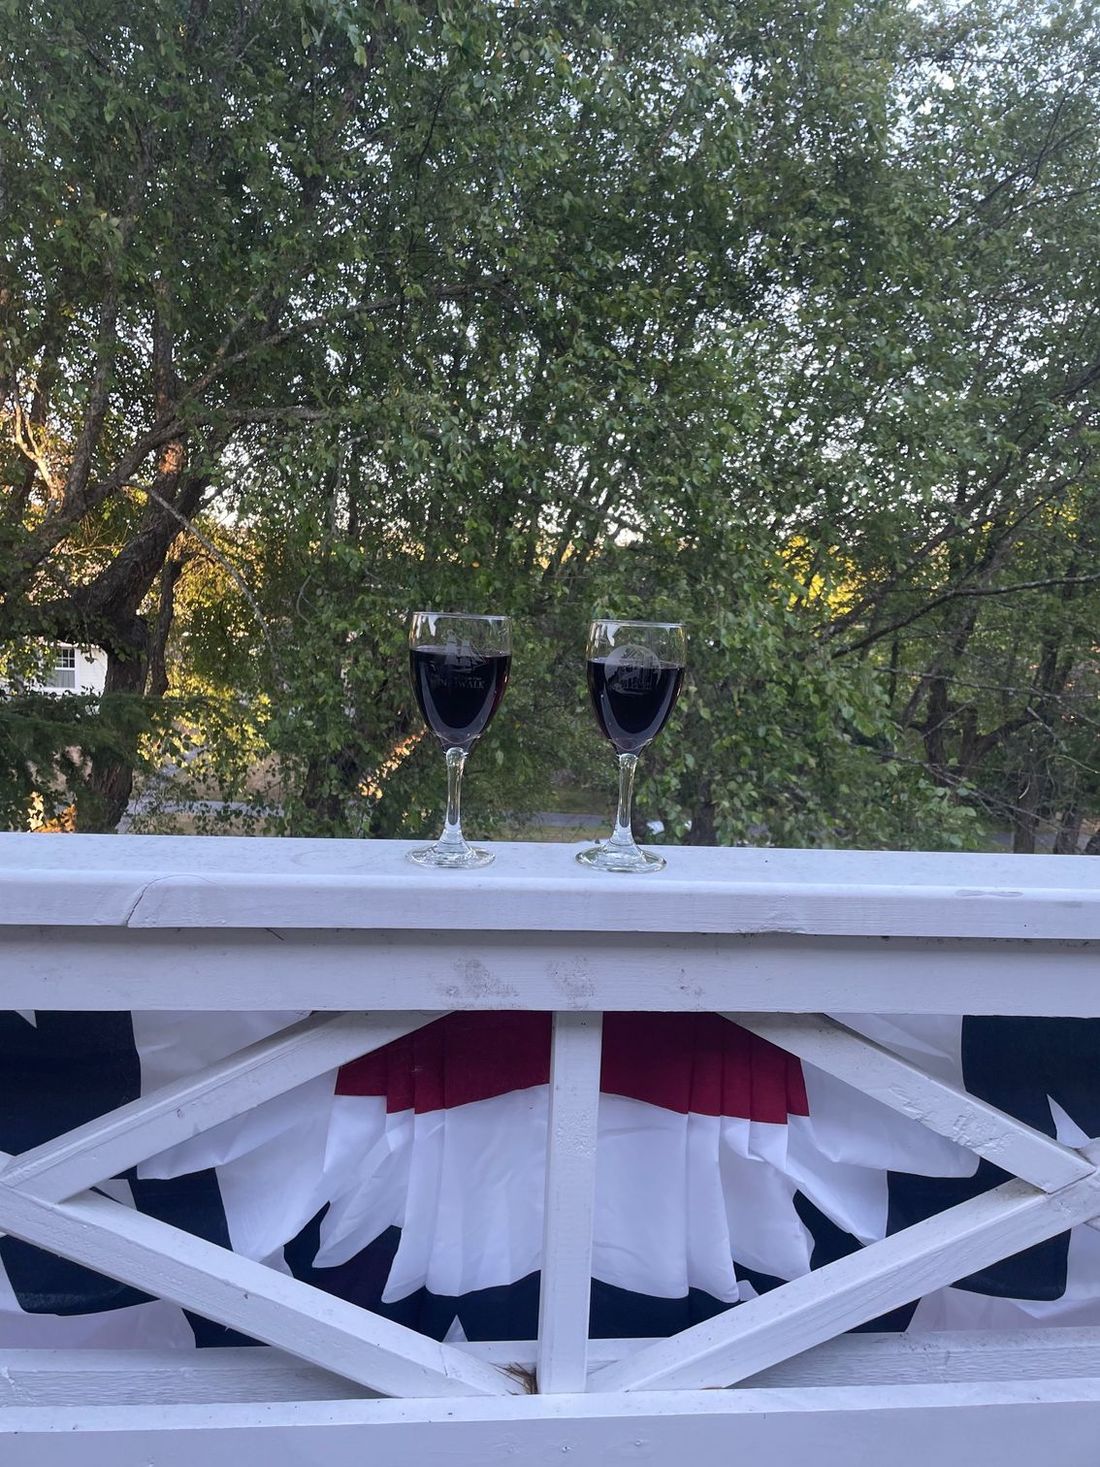 two glasses of wine on the porch railing